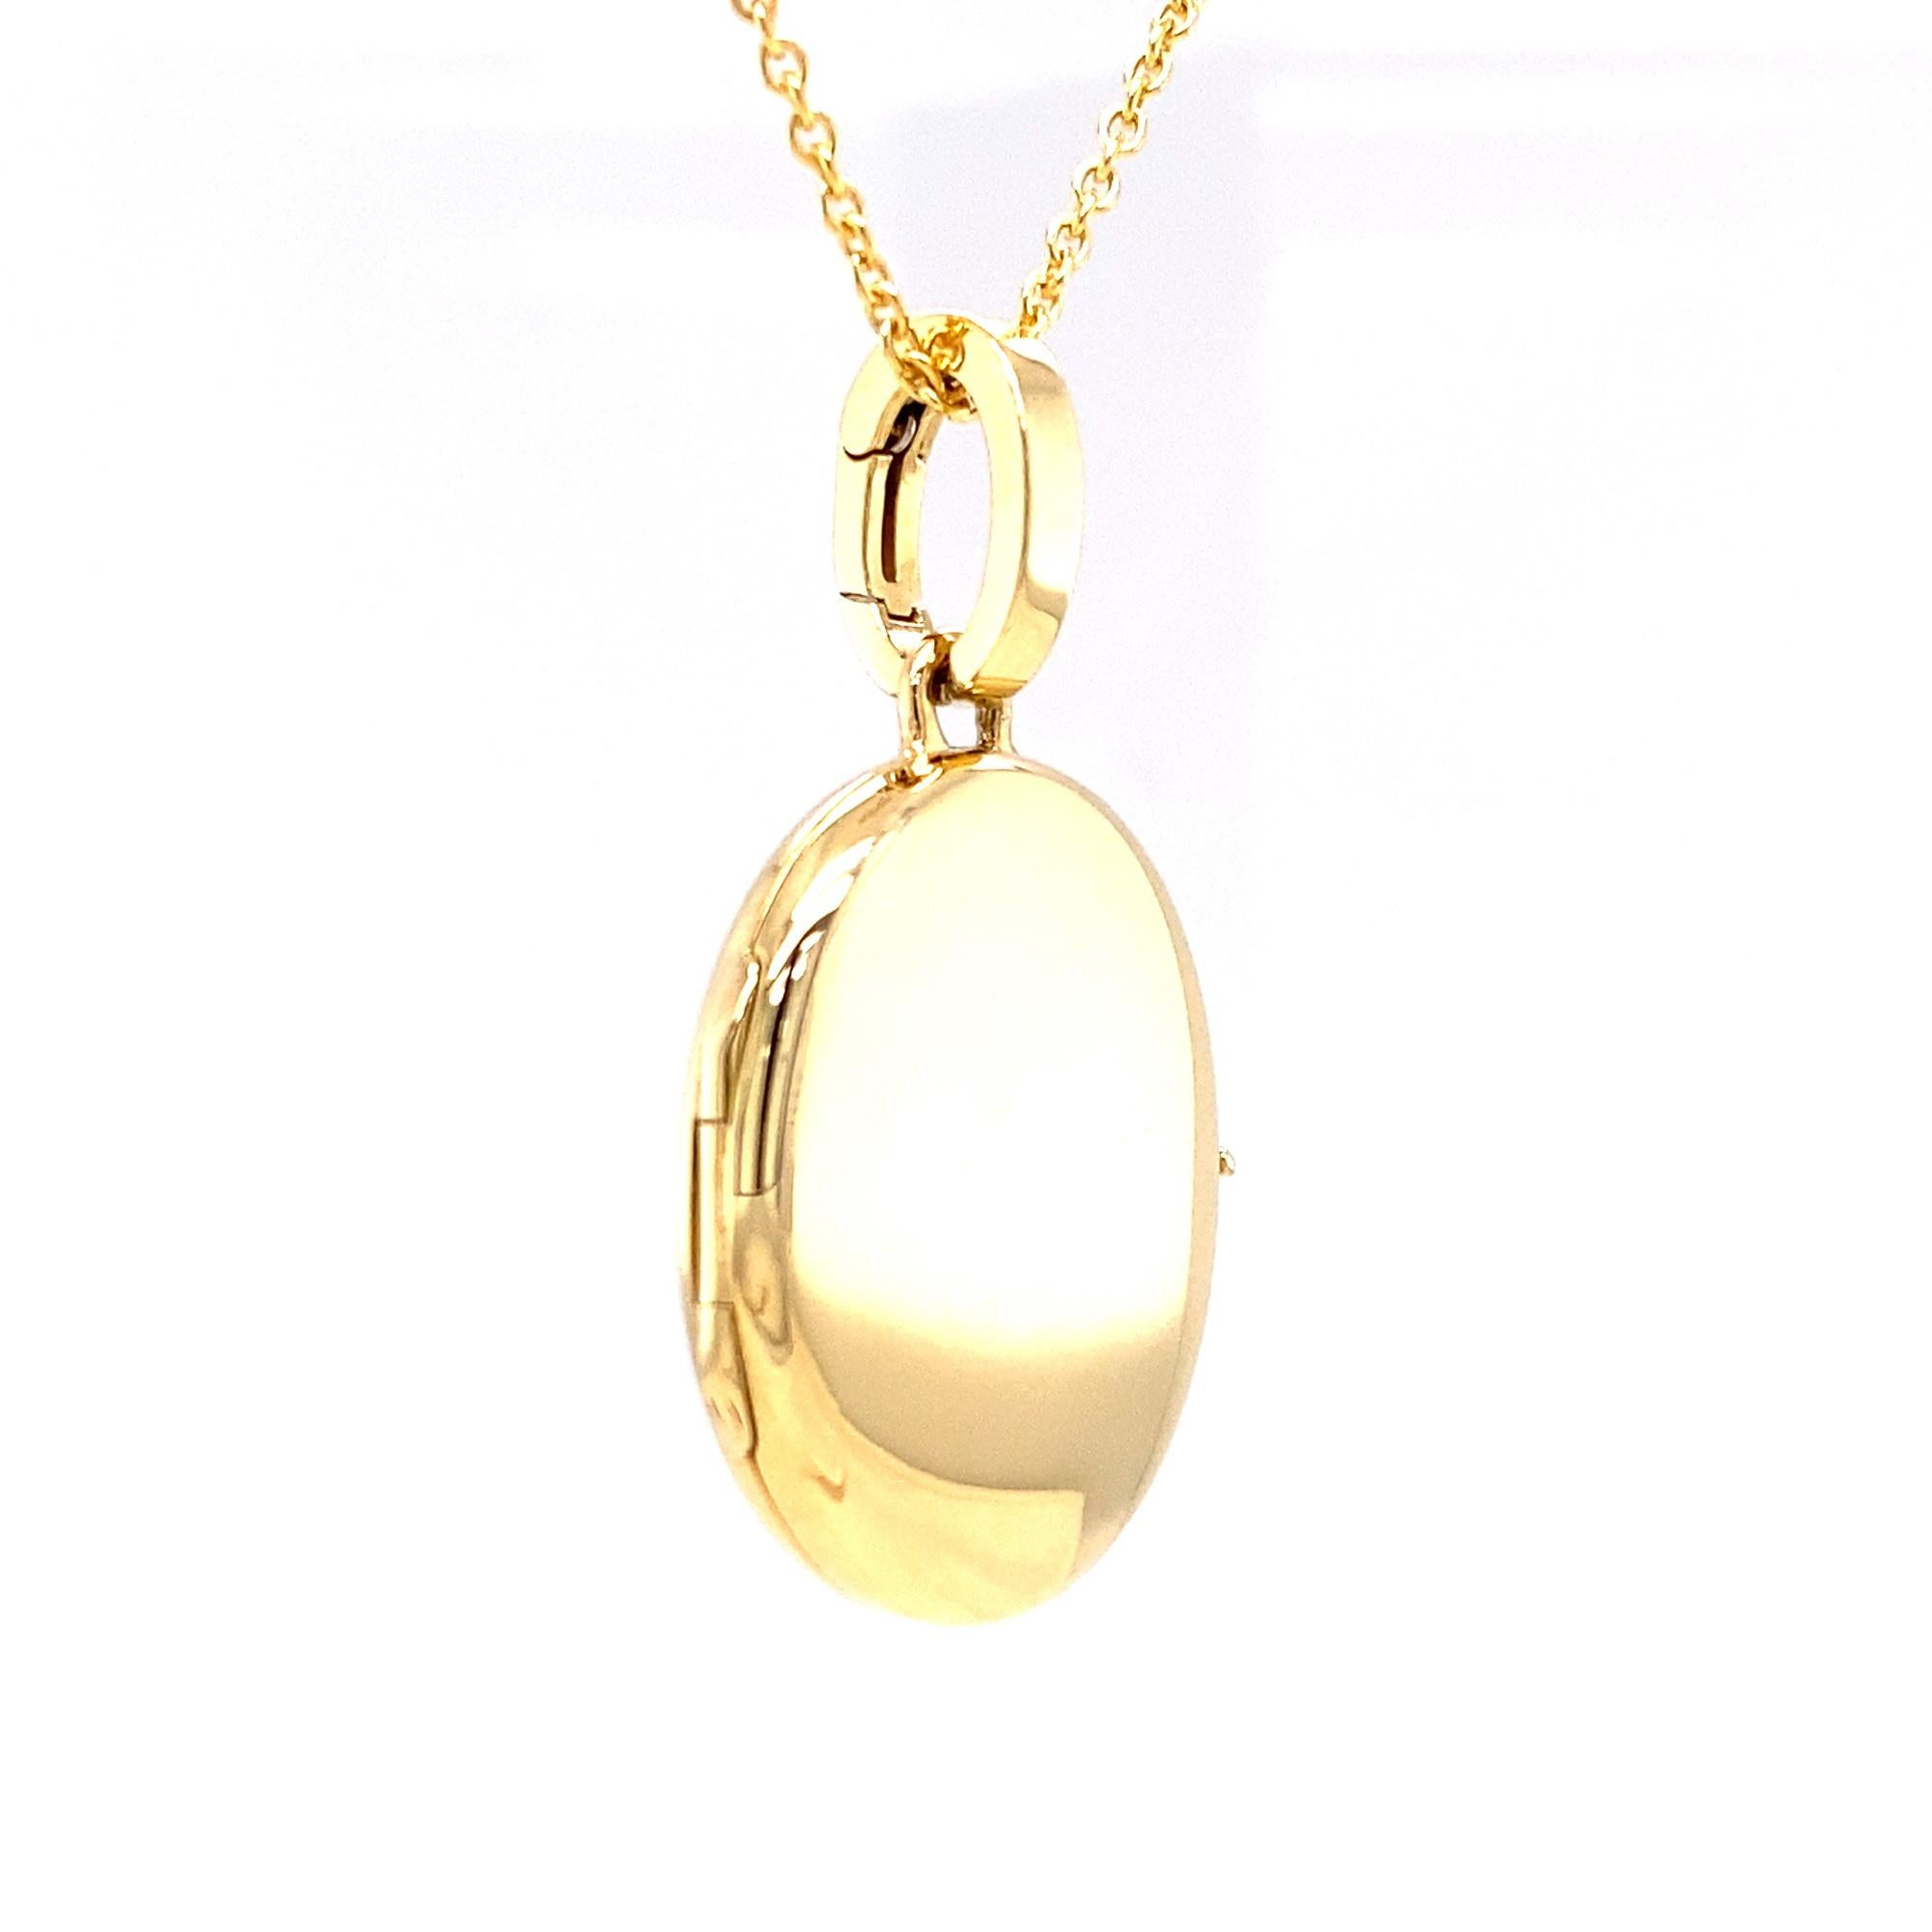 Women's Customizable Oval Polished Pendant Locket Necklace 18k Yellow Gold 23 mm x 20 mm For Sale